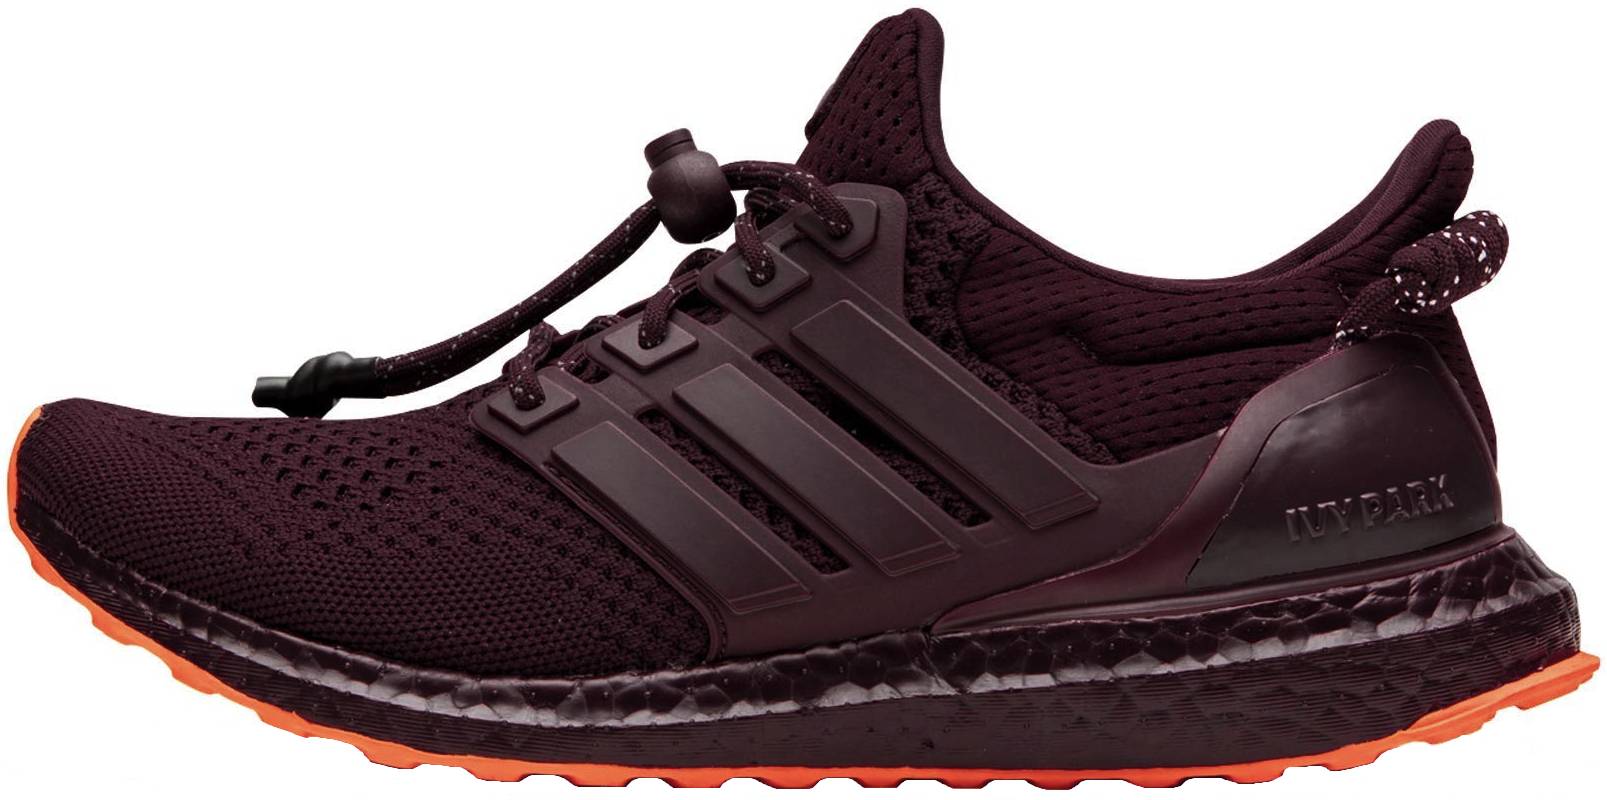 Adidas Ivy Park UltraBoost deals in red 